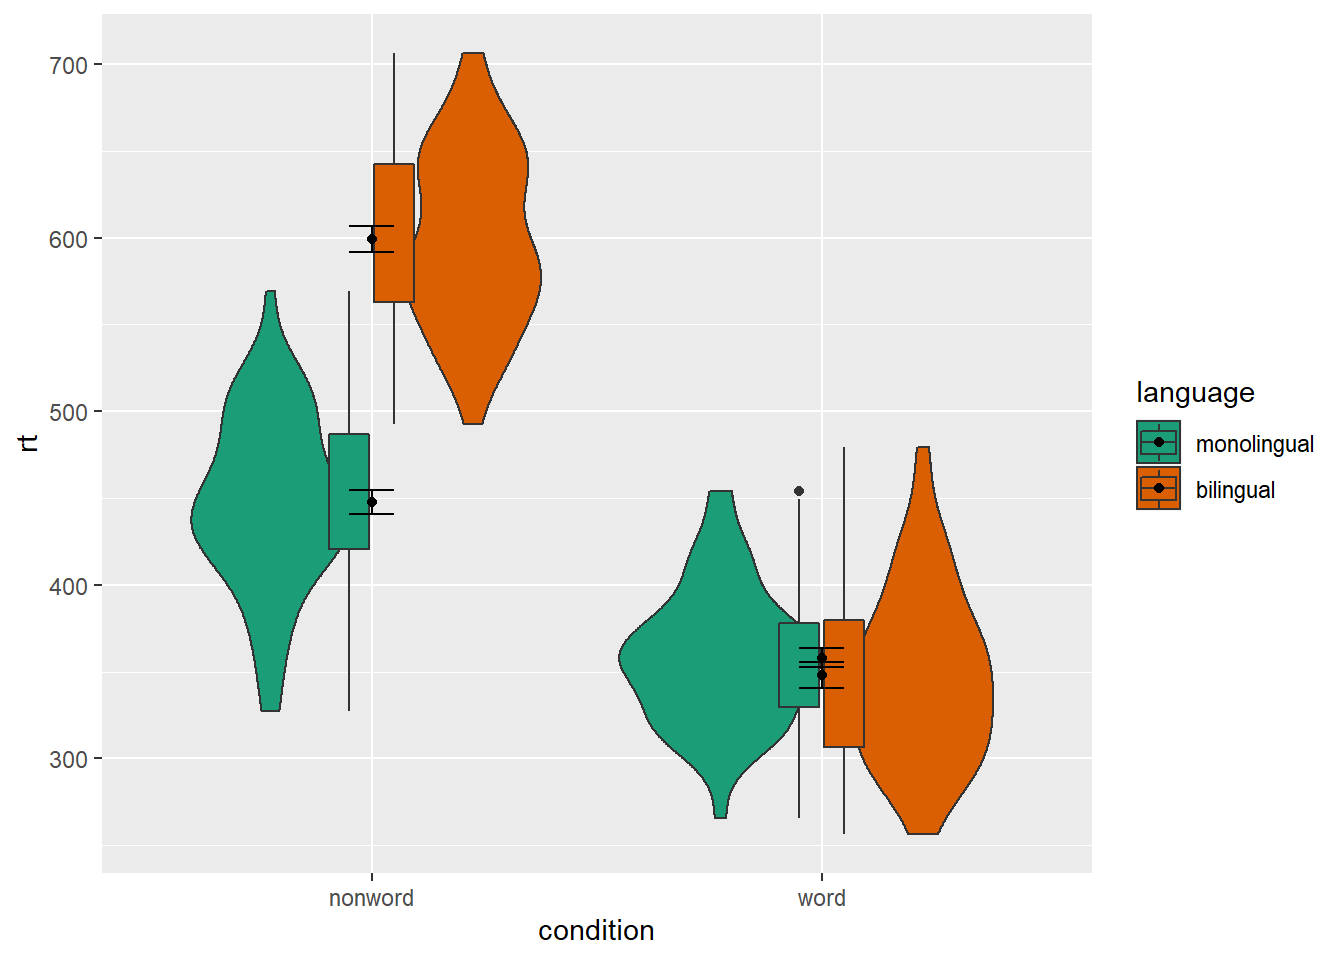 Grouped violin-boxplots without repositioning.